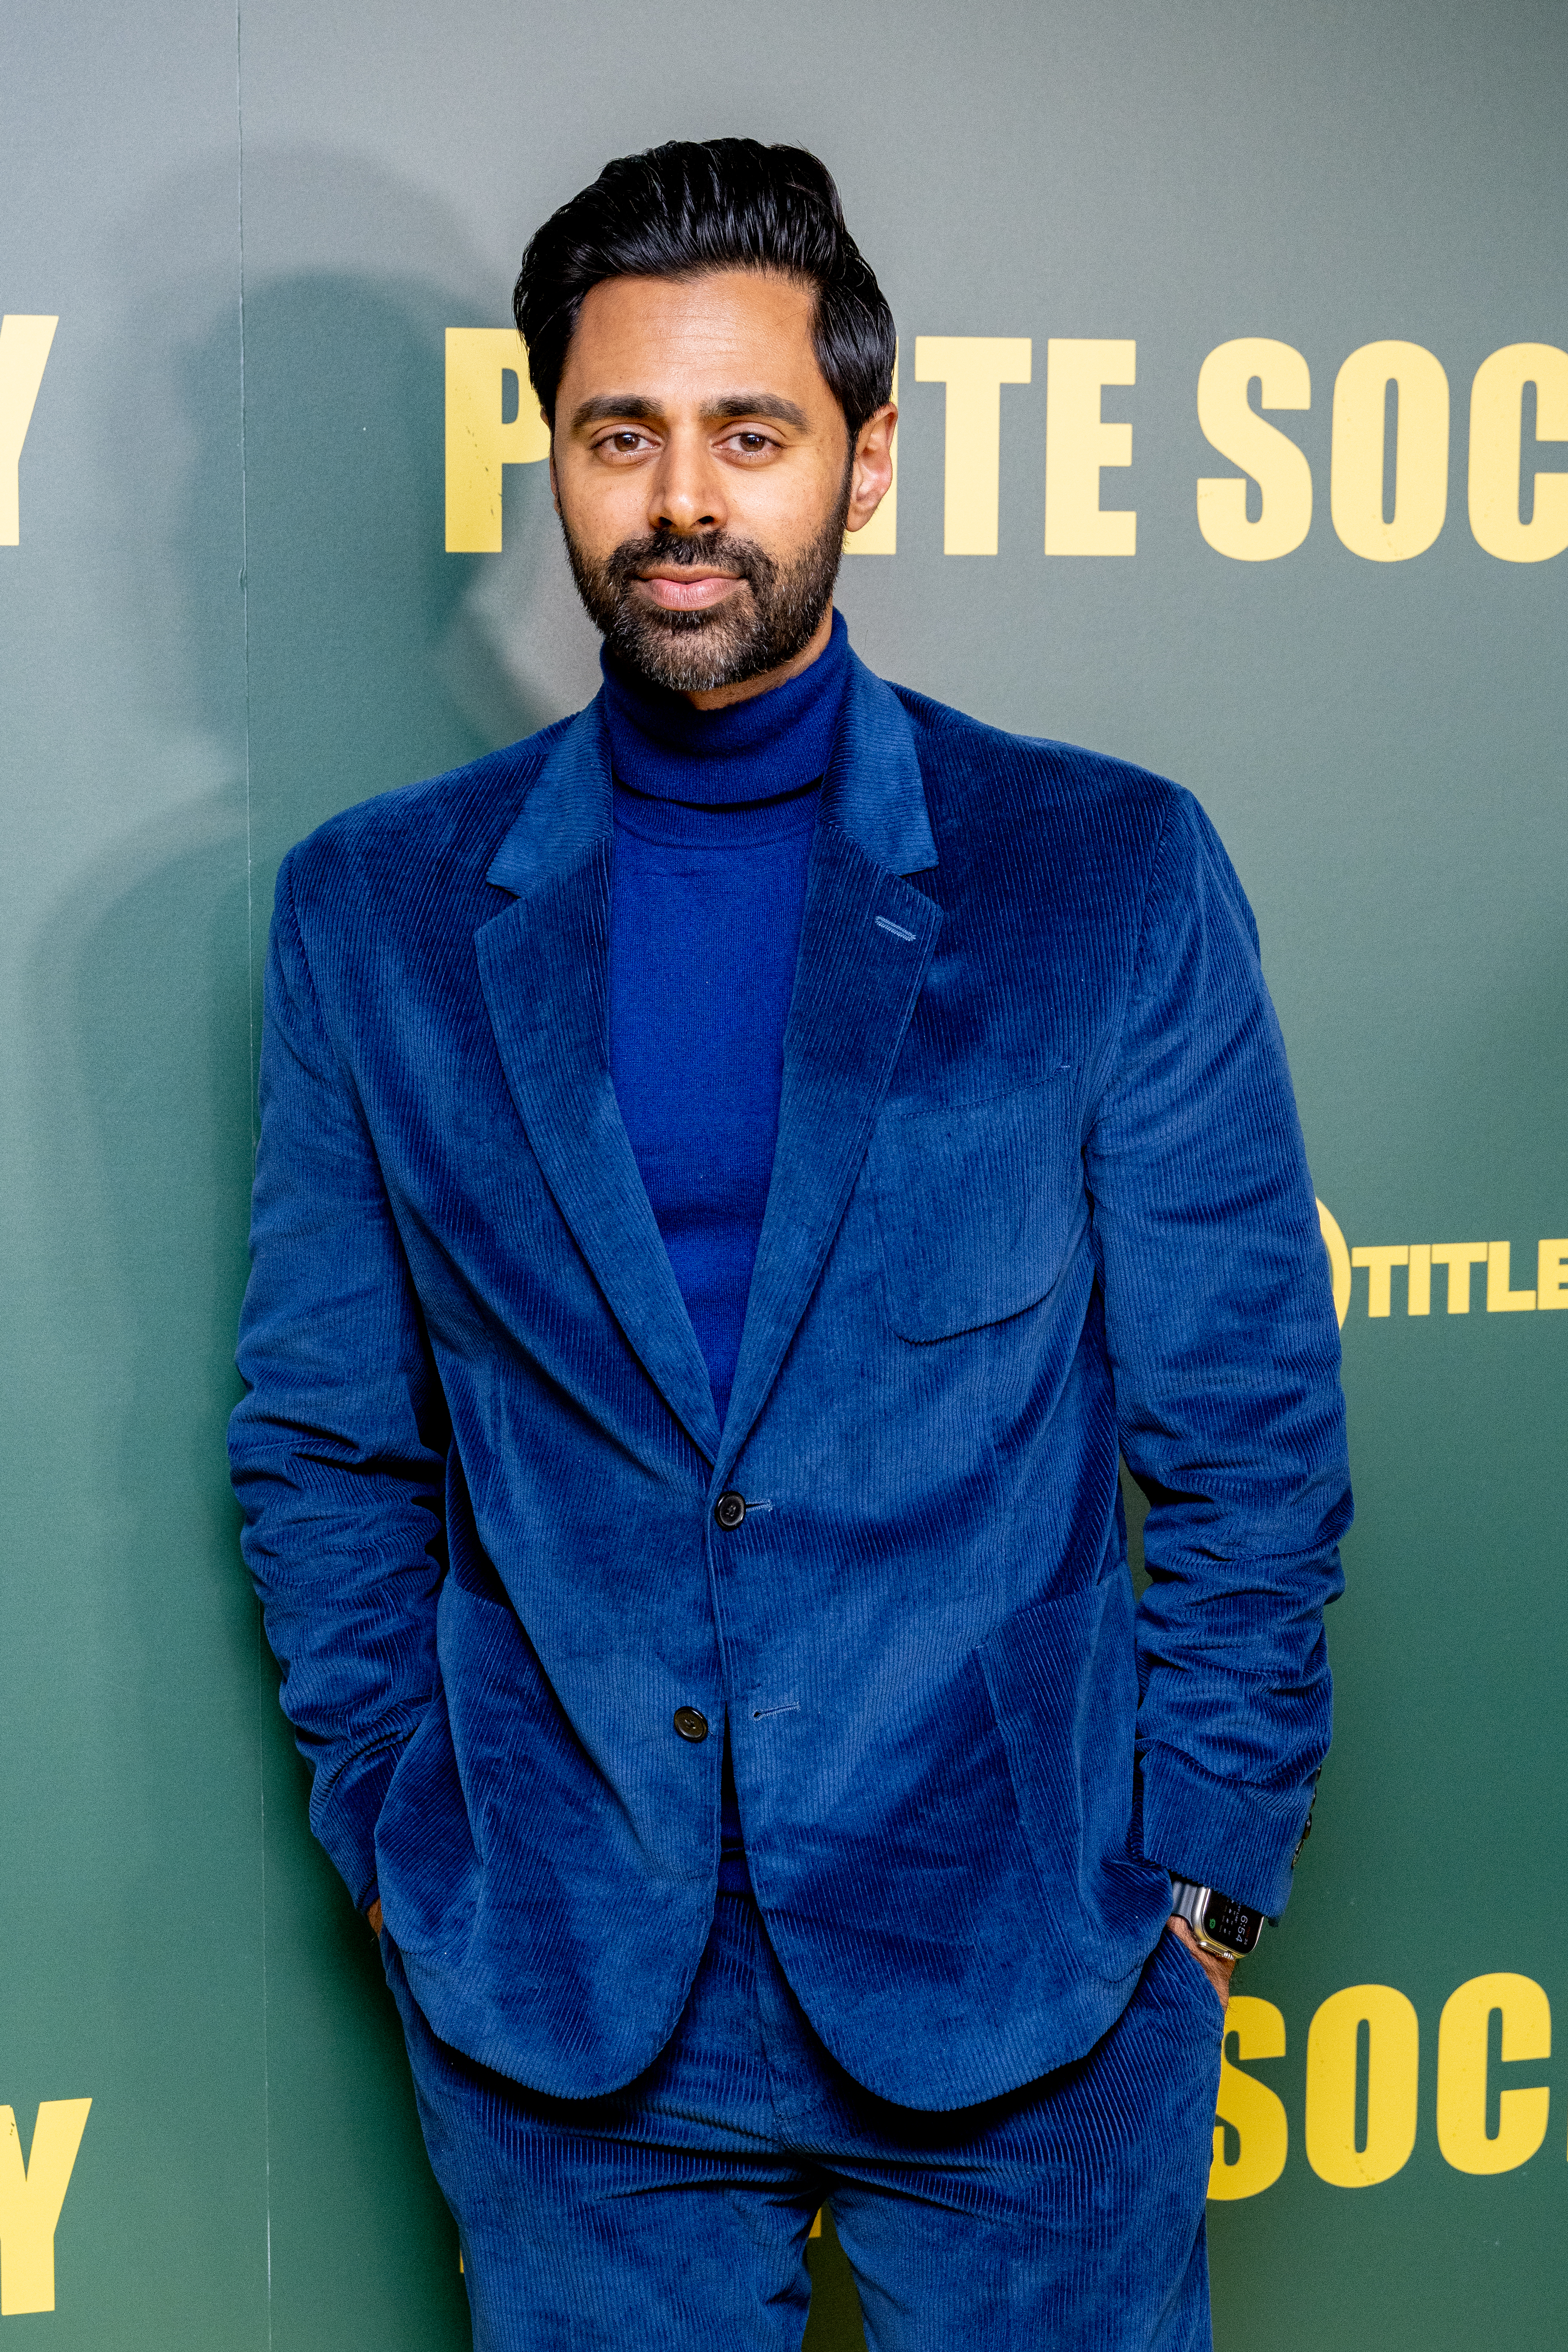 Hasan Minhaj attends the "Polite Society" New York screening at Metrograph on April 24, 2023, in New York City. | Source: Getty Images